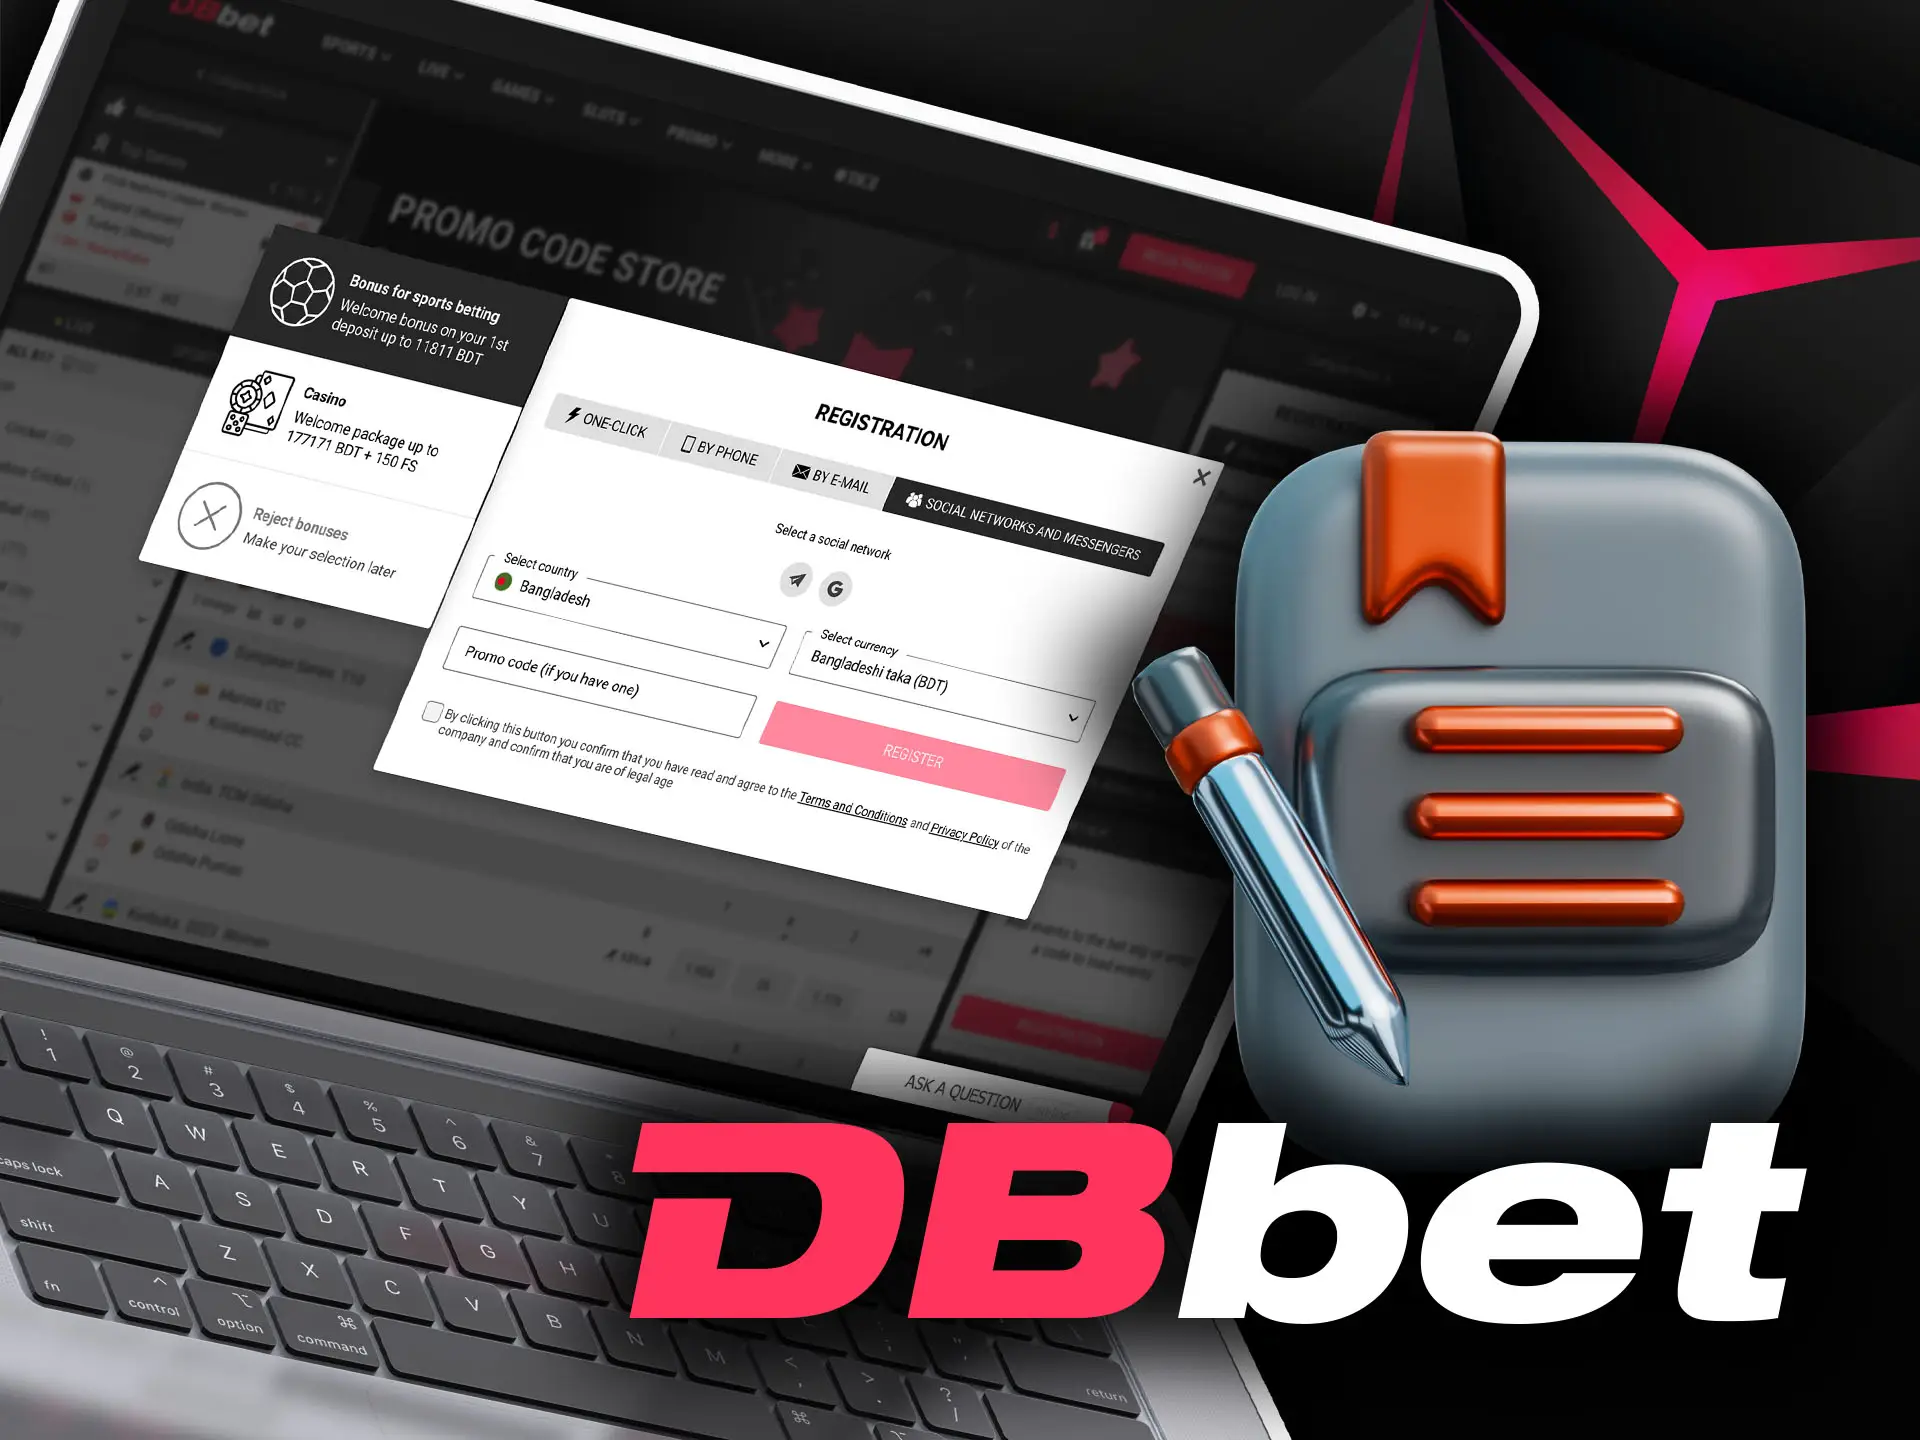 Follow all the requirements to sign up for DBbet with no problems.